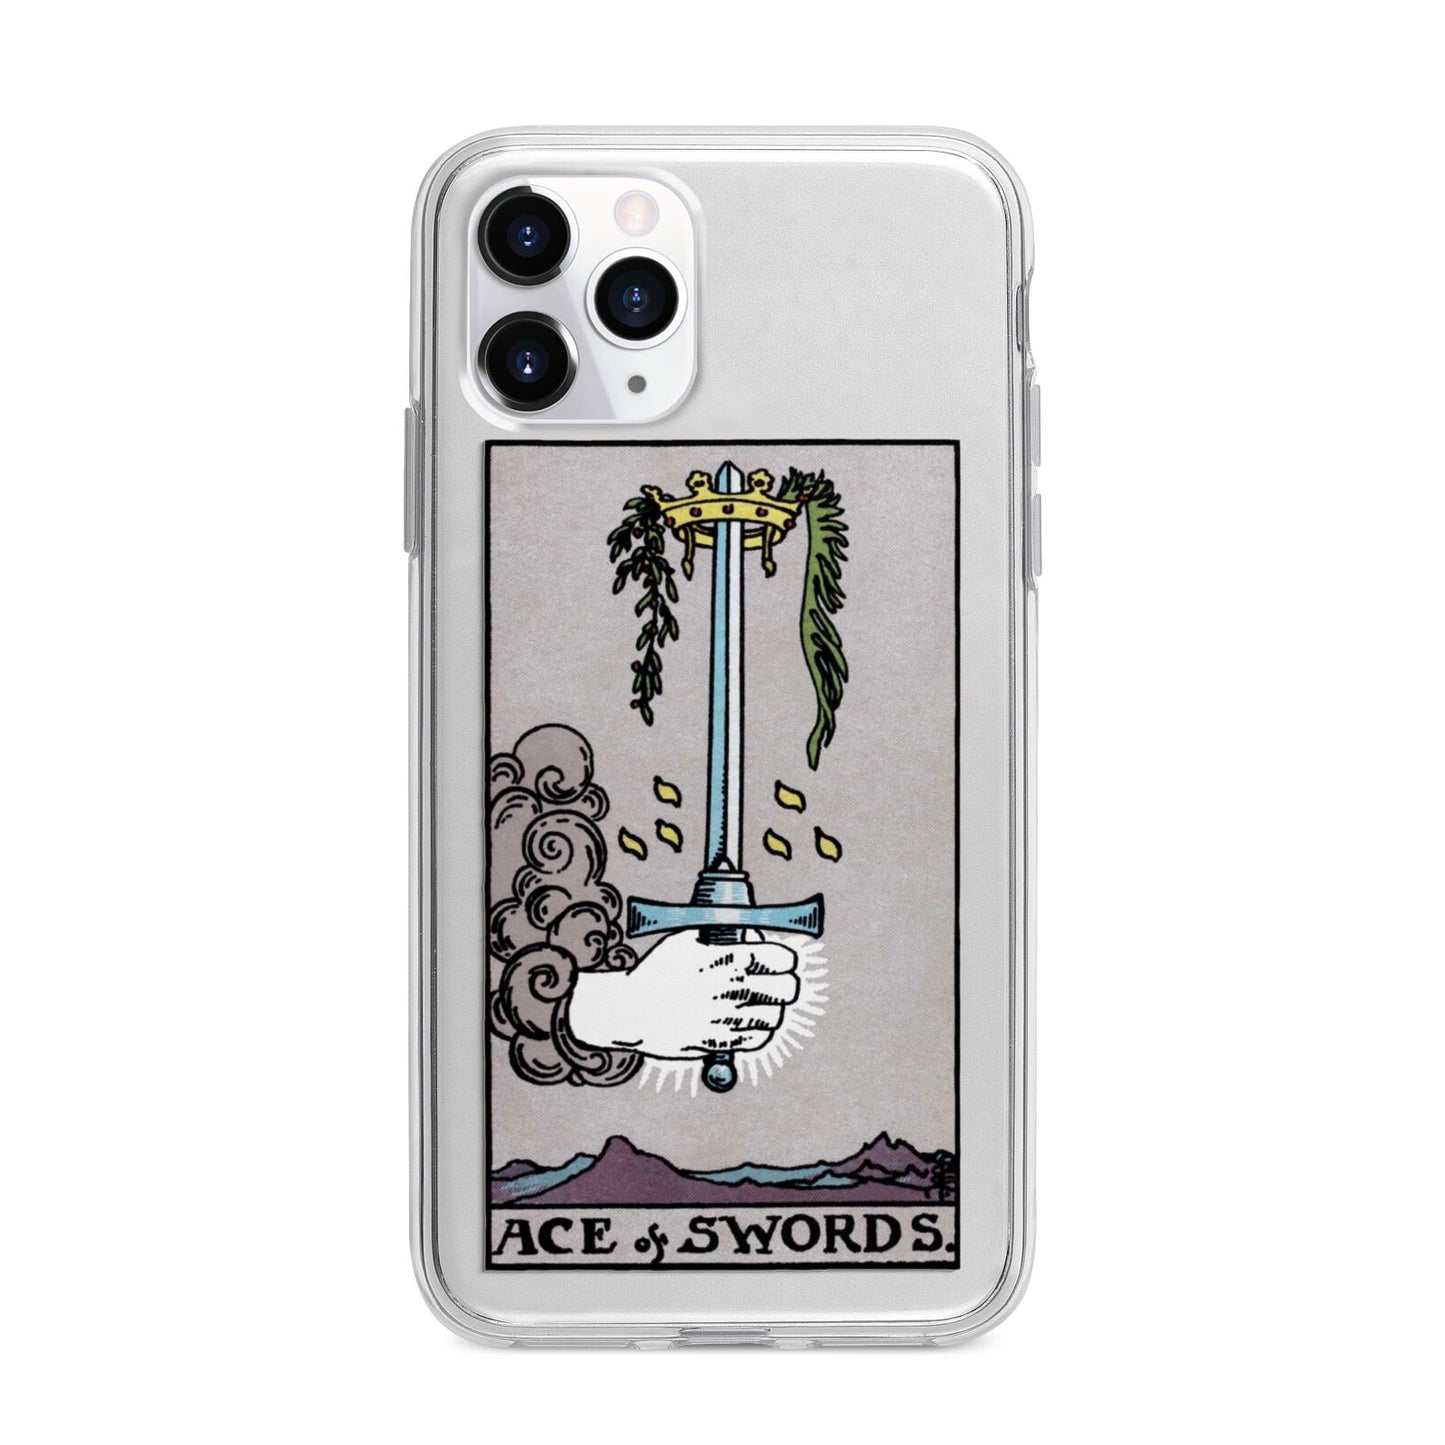 Ace of Swords Tarot Card Apple iPhone 11 Pro Max in Silver with Bumper Case